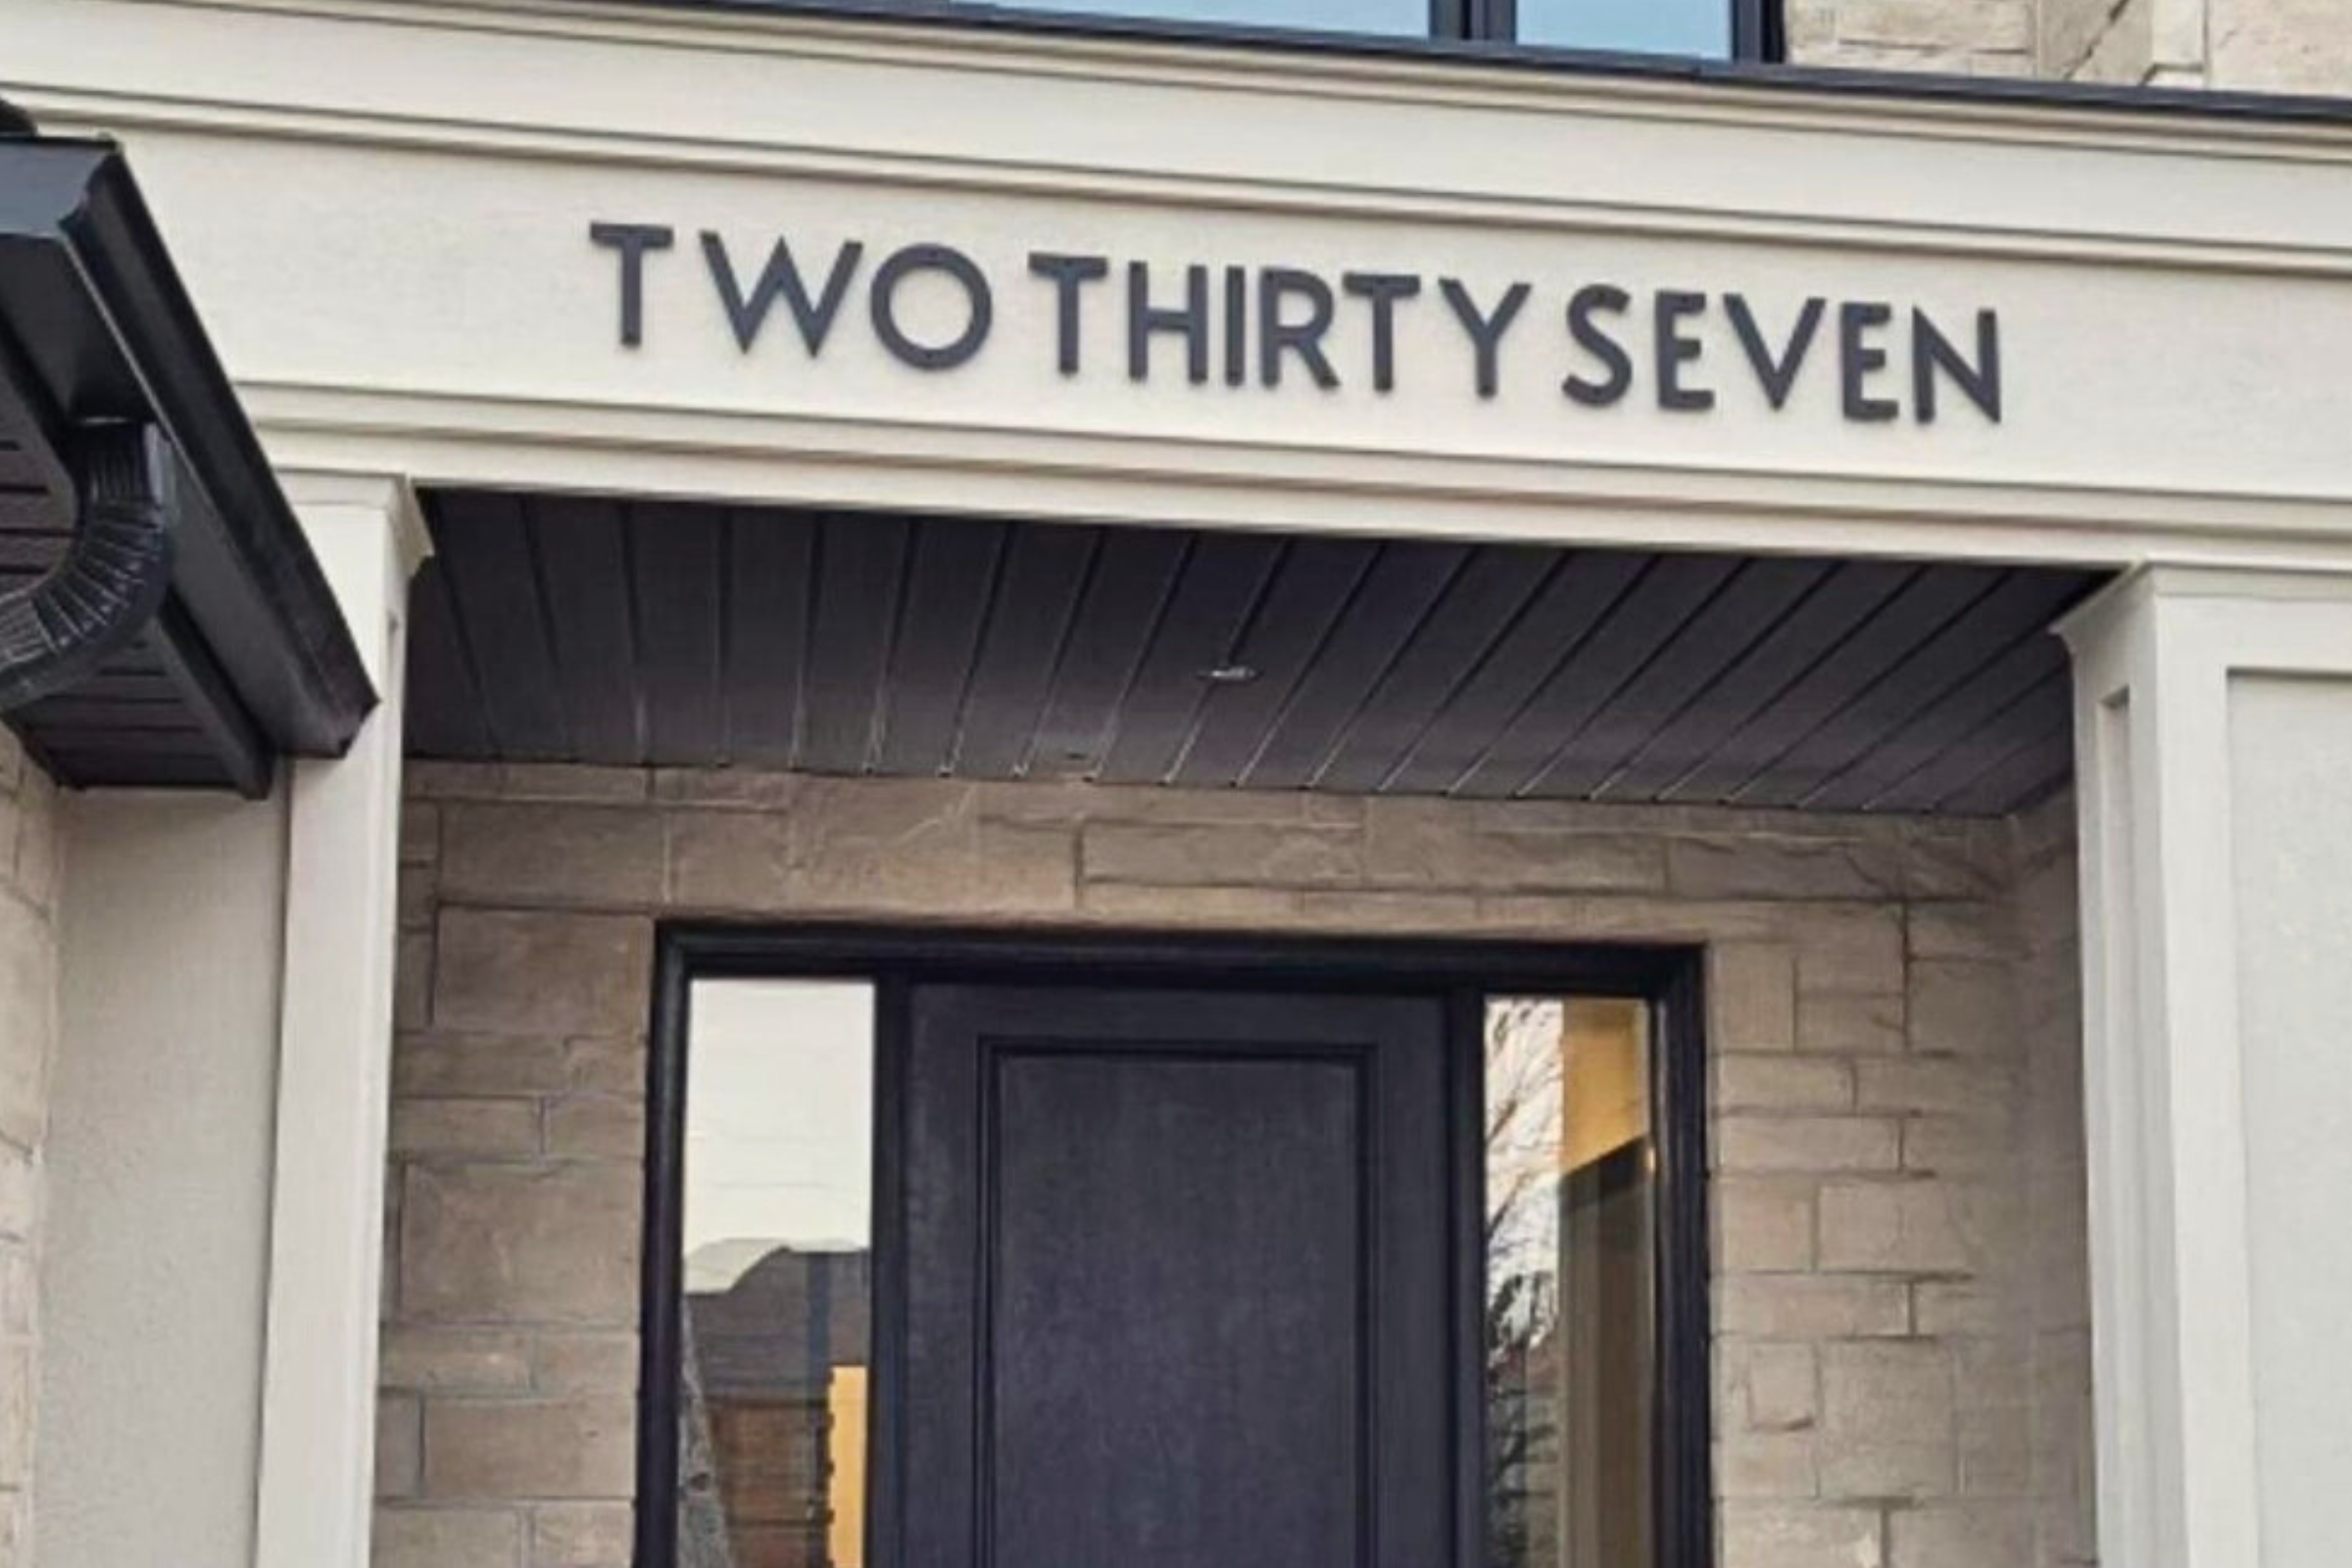 CLASSIC MODERN house numbers and letters to spell out your address number